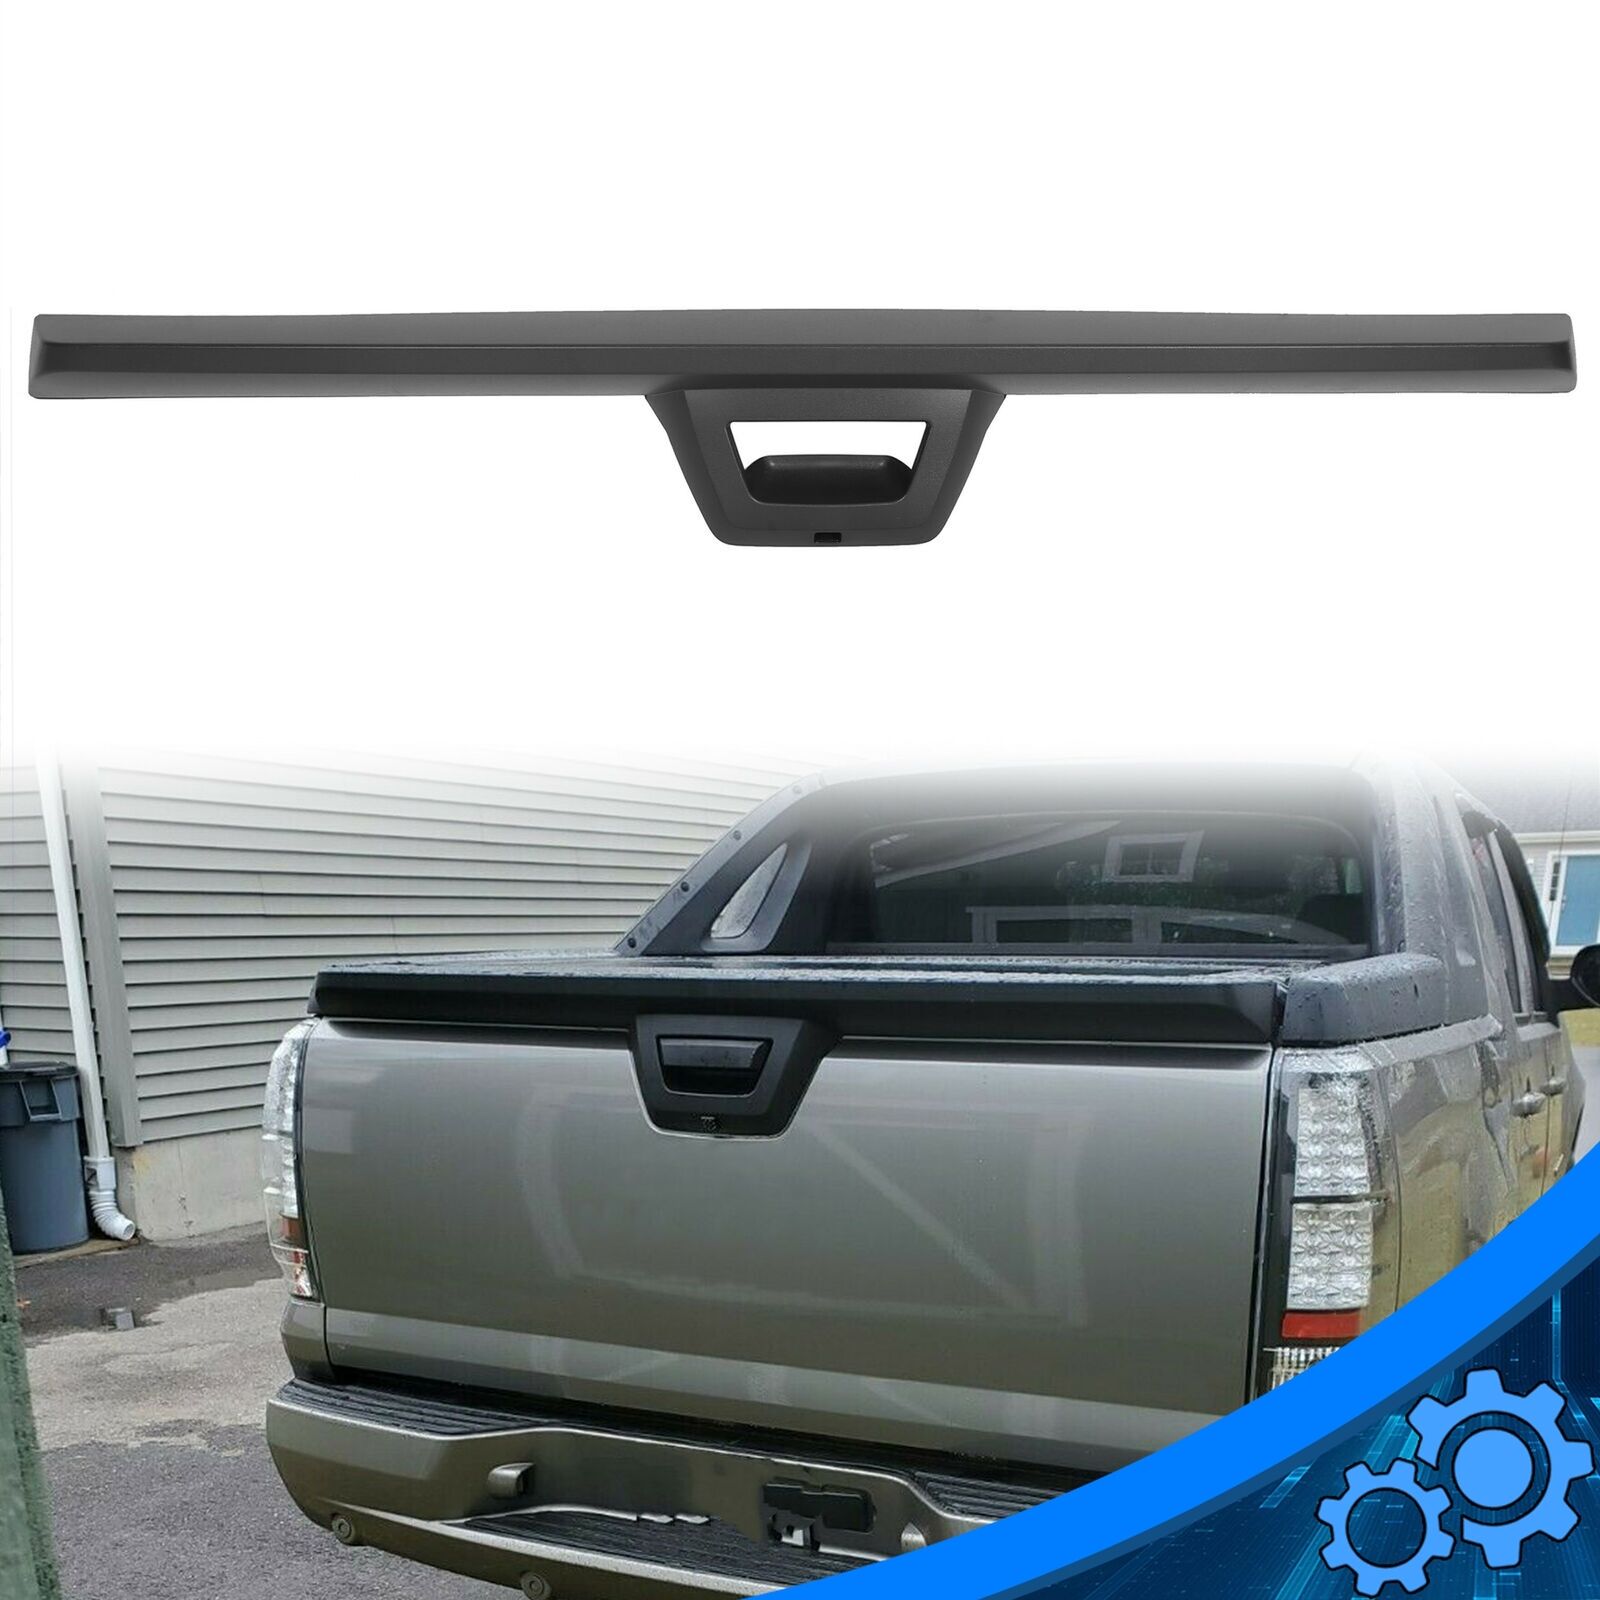 NEW Rear End Tailgate Spoiler Molding Trim For 07-13 Avalanche Escalade